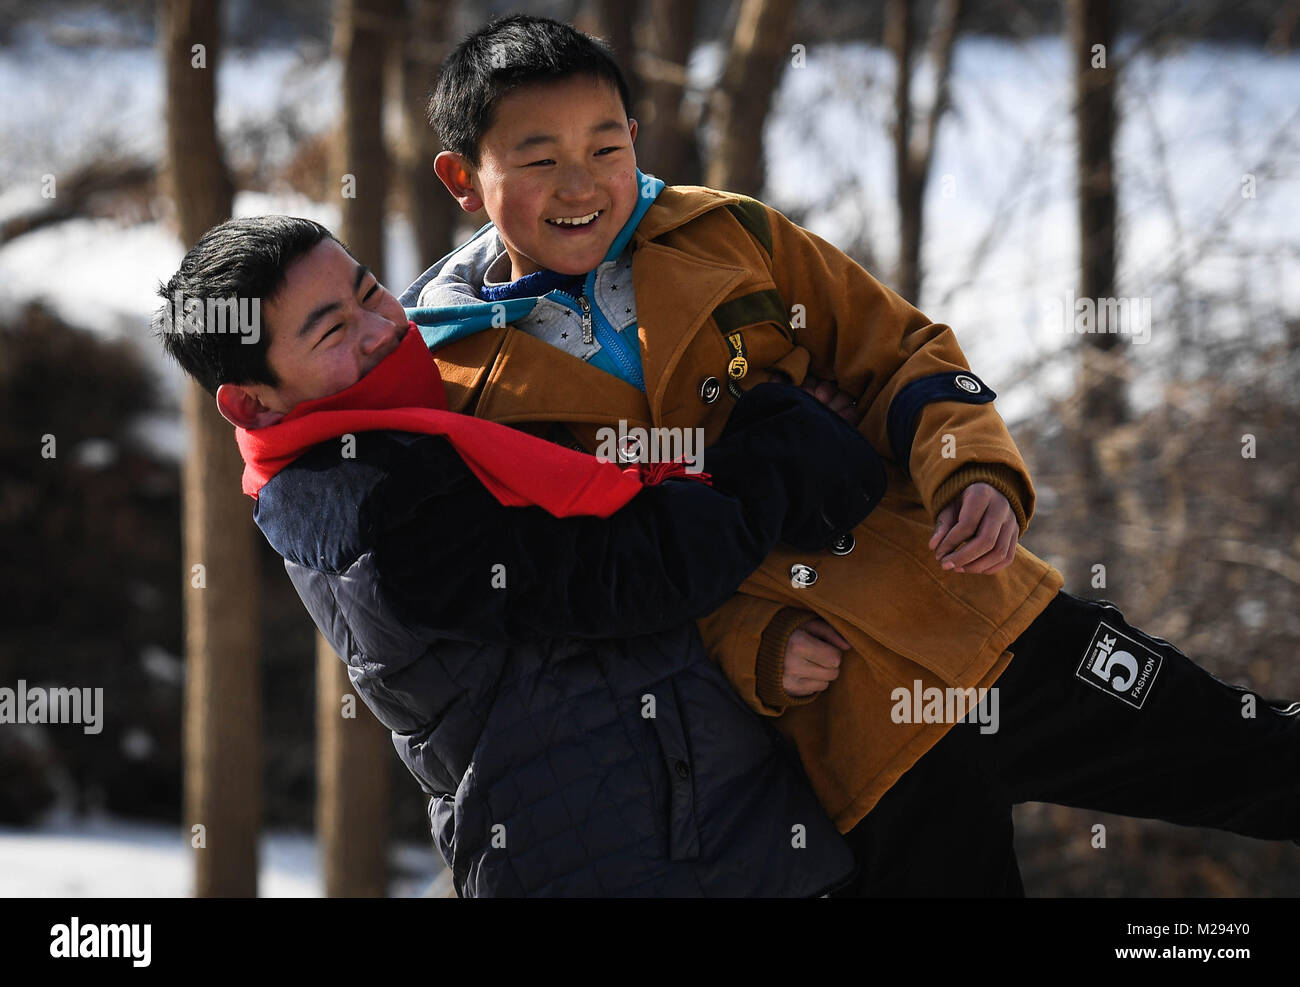 (180206) -- KANGLE, Feb. 6, 2018 (Xinhua) -- Sun Jianjun (L) and his younger brother Sun Jianqiang play in Xinzhuang Village, Basong Township, Kangle County of northwest China's Gansu Province, Feb. 3, 2018. Spring Festival, or Chinese Lunar New Year, falls on Feb. 16 this year. Hundreds of millions of Chinese will return to their hometowns for family gatherings. 14-year-old Sun Jianjun and his 15 schoolmates are among these travellers eager back to home. On Feb. 1, the first day of the 2018 Spring Festival travel rush, they stepped onto a train in Nantong of east China's Jiangsu Province Stock Photo